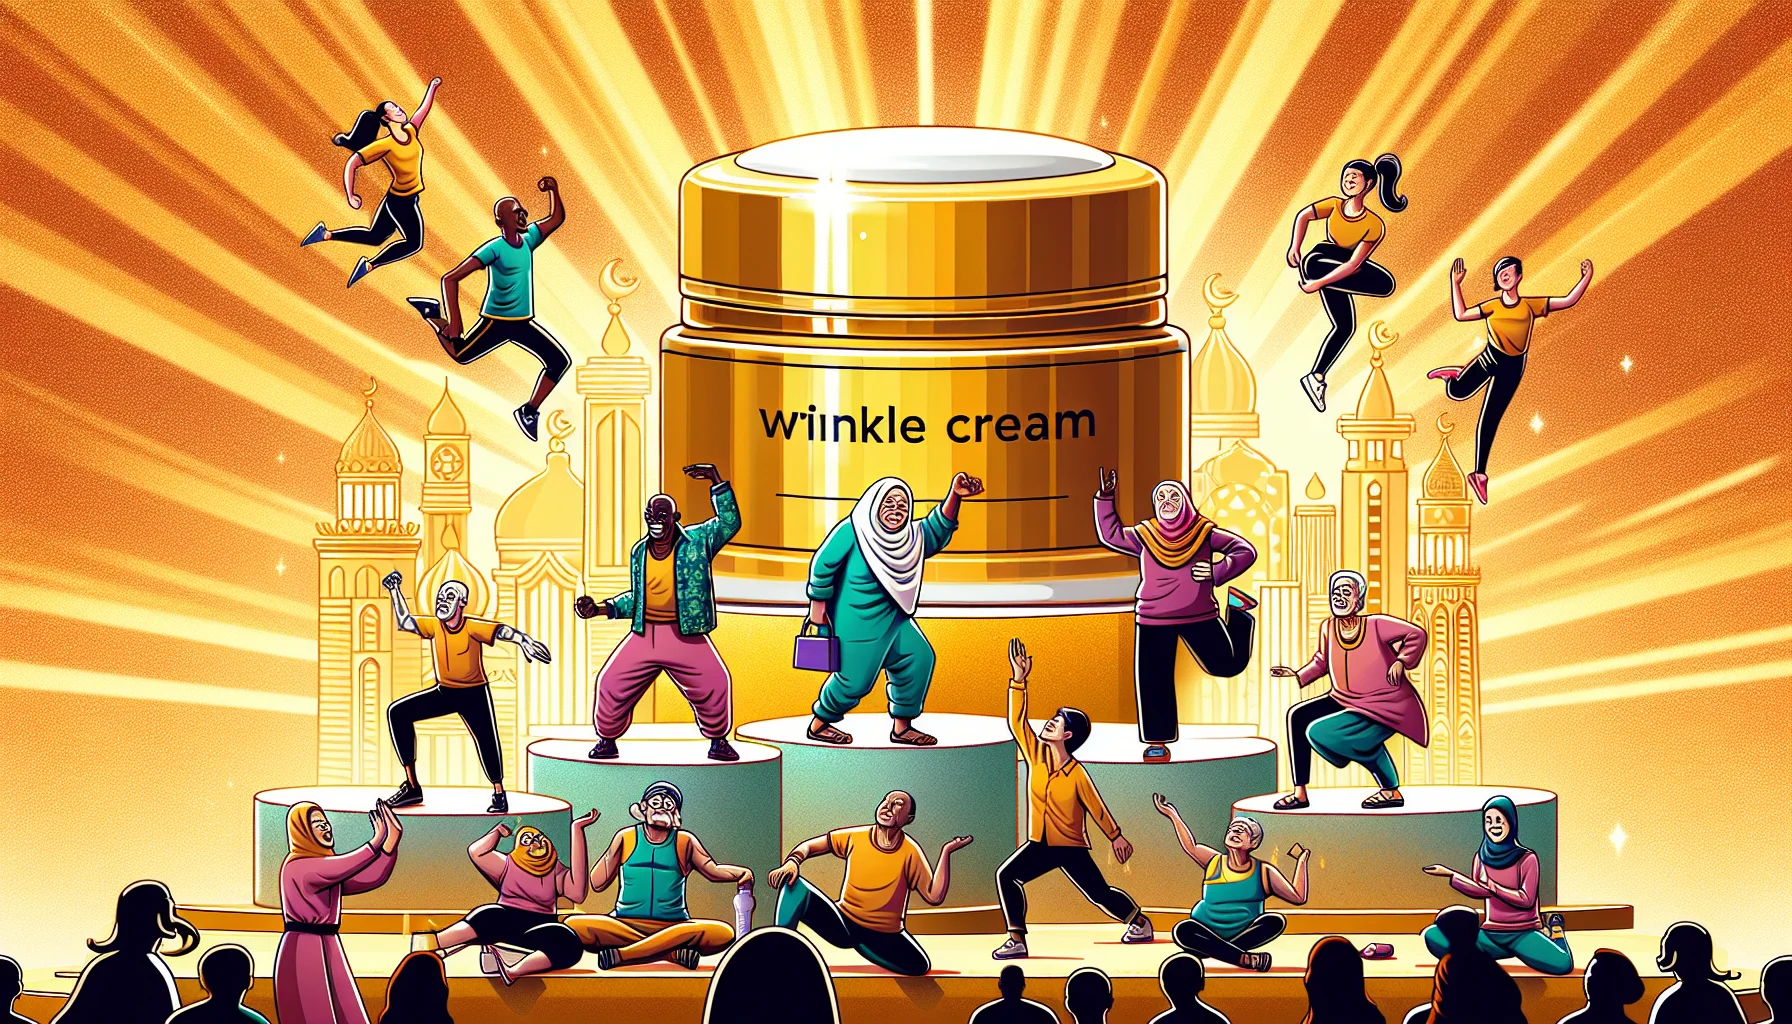 Create an image of a comical scene that merges beauty and fitness. Picture a highly exaggerated wrinkle cream jar, radiating a luminous golden glow, placed triumphantly on a pedestal. Nearby, a group of diverse people of different genders and descents are hilariously attempting various exercises as if in a desperate bid to reach the coveted wrinkle cream - a Black female doing jumping jacks, a White male straining with sit-ups, a South Asian female in a laughably incorrect yoga pose and a Middle-Eastern male precariously balancing on one foot. This fitness pandemonium is being observed by an amused Hispanic female dressed as a beauty specialist holding a sign saying 'Get Fit, Stay Beautiful'. The predominant vibe of the image should be lighthearted and fun, enticing people to join the fitness rush.